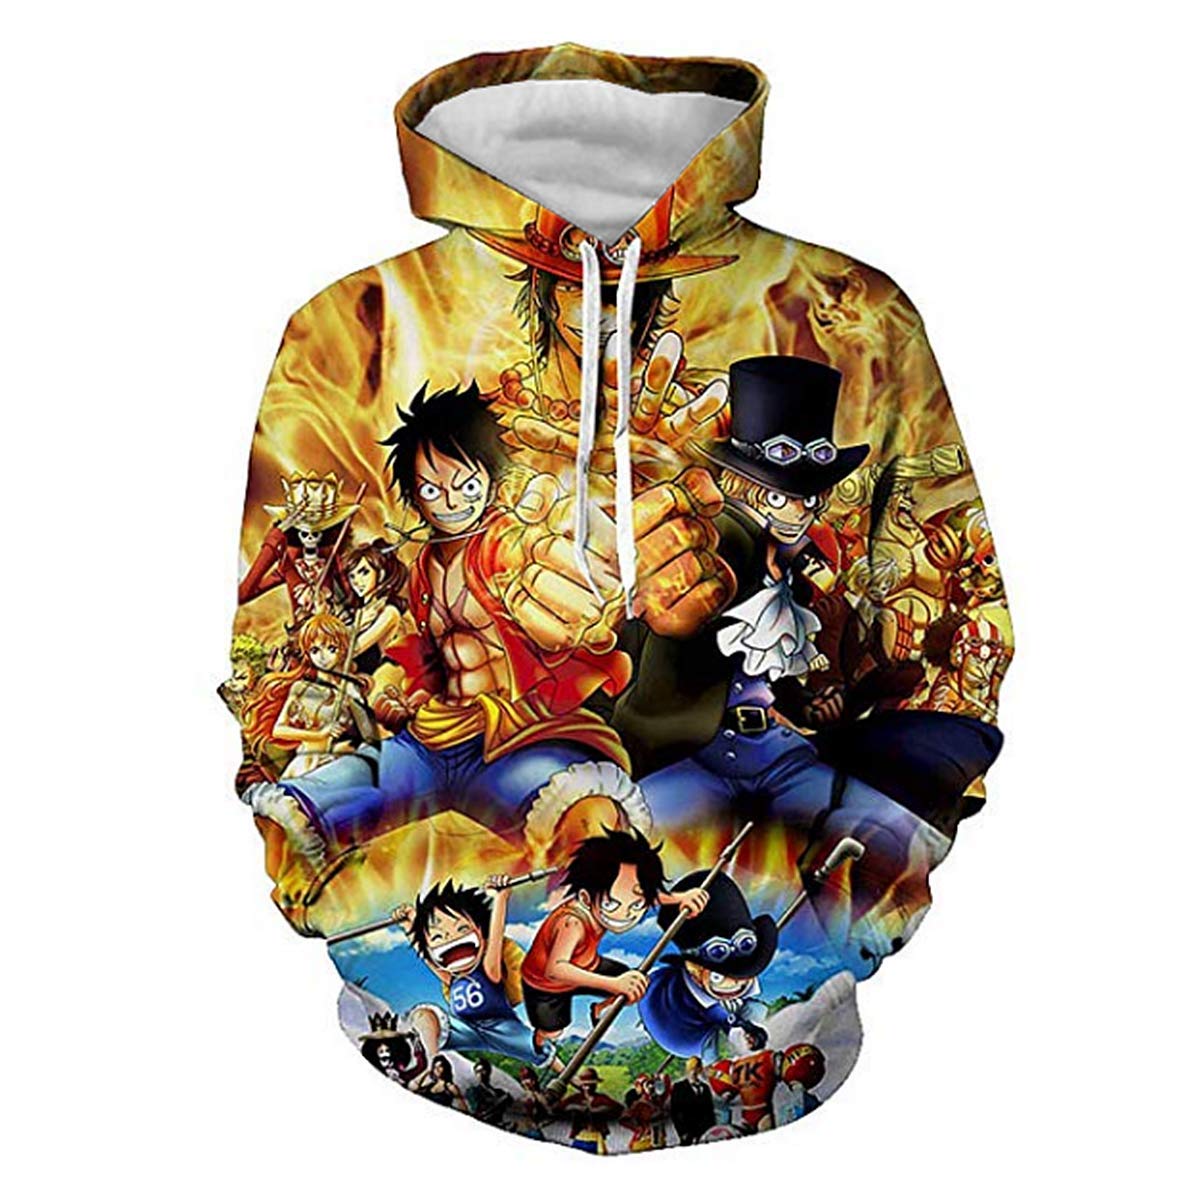 New Japan Cartoon One Piece Monkey D Luffy 3D Hoodies Men Fashion Casual Coat Comfortable Autumn 5 - Official One Piece Store